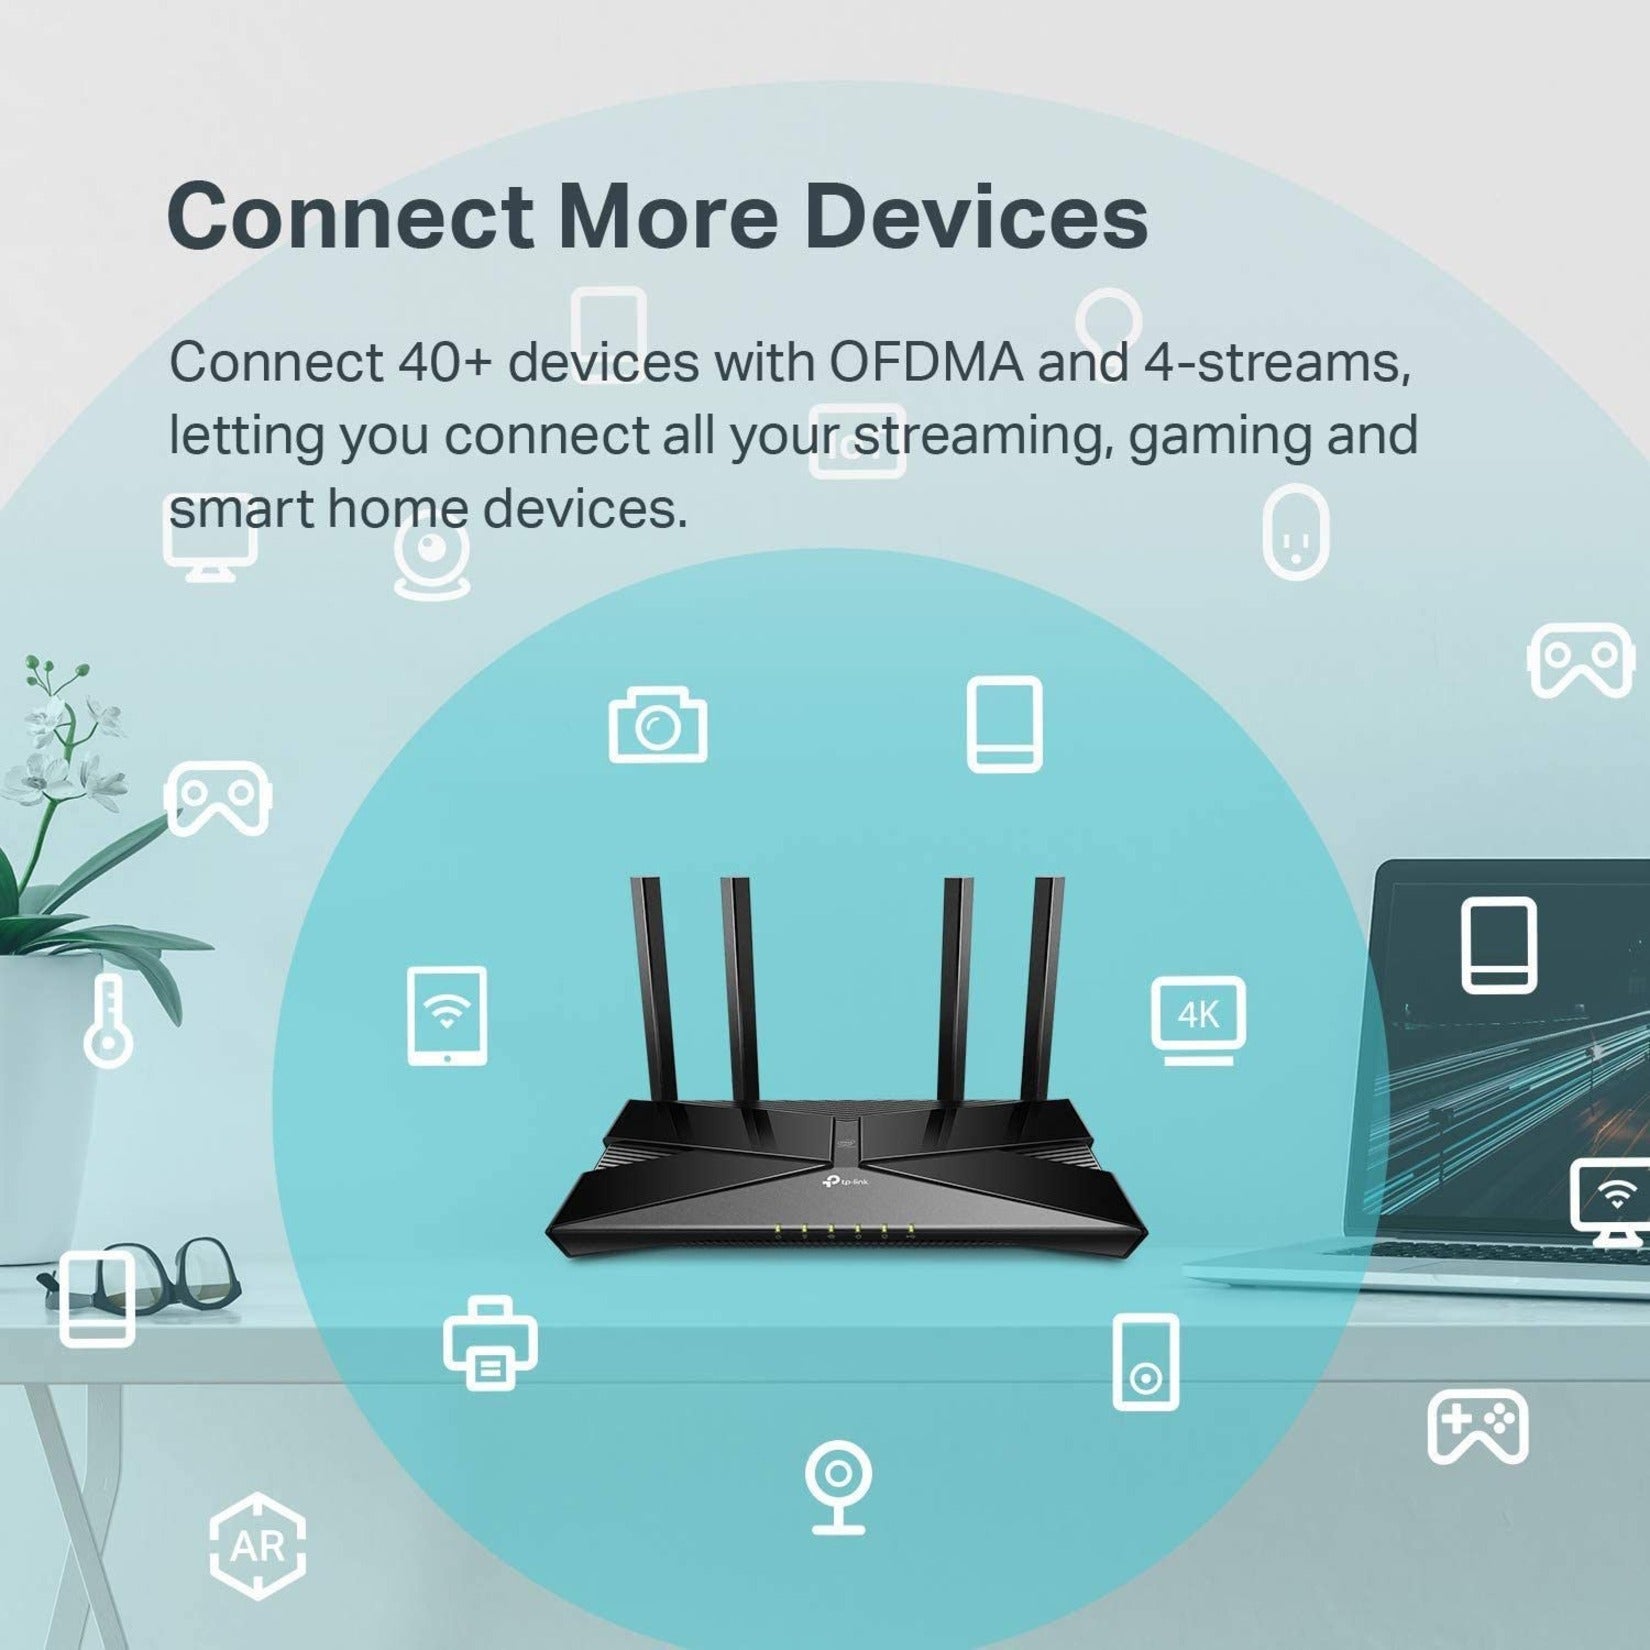 TP-Link ARCHER AX50 AX3000 Dual Band Gigabit Wi-Fi 6 Router, 375 MB/s Speed, 4 Antennas